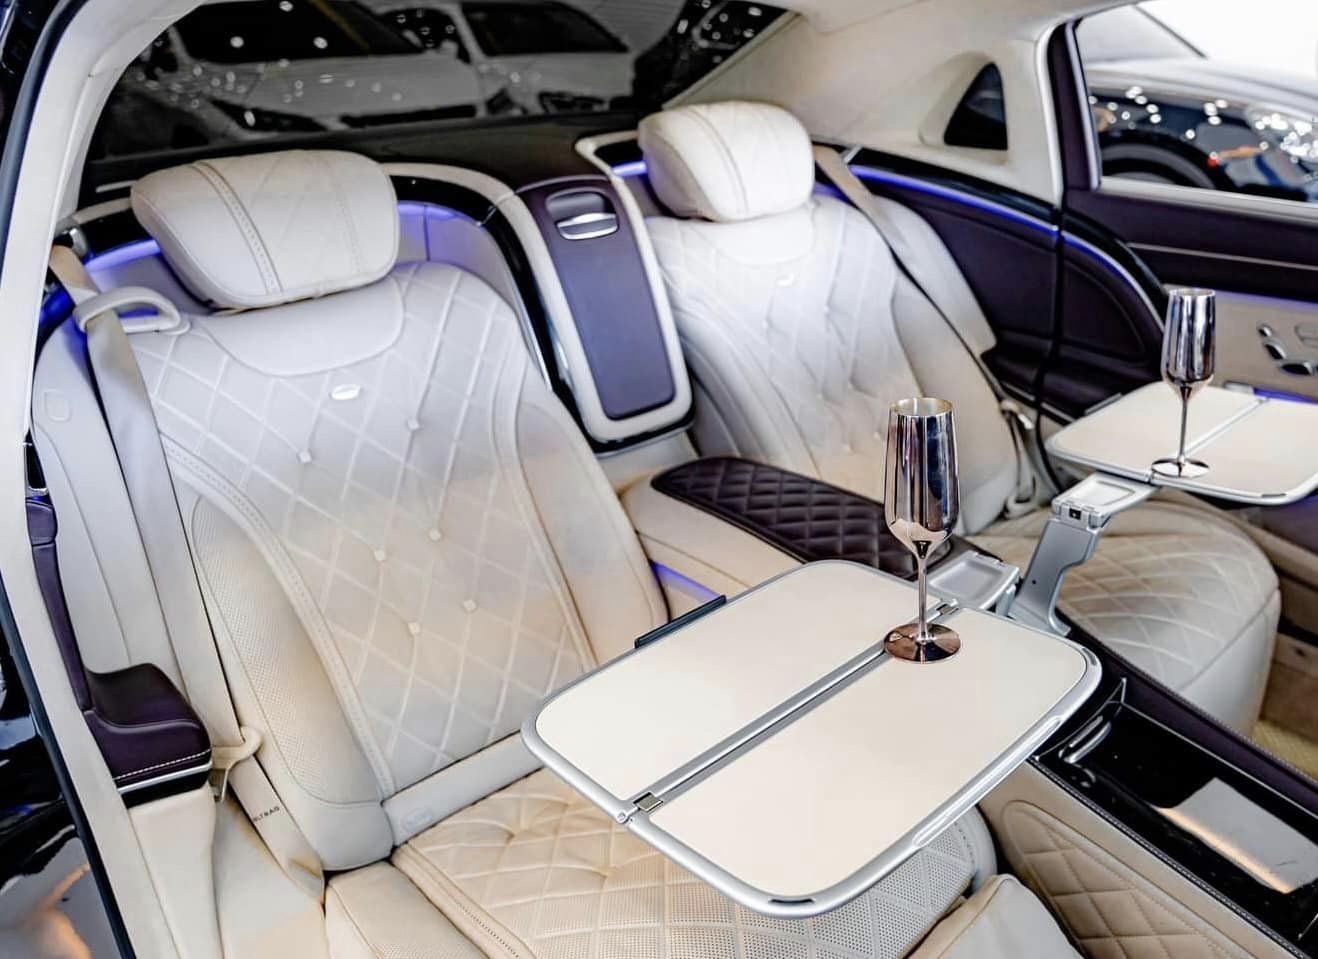 Mercedes-Maybach S 450 2019 -  2019